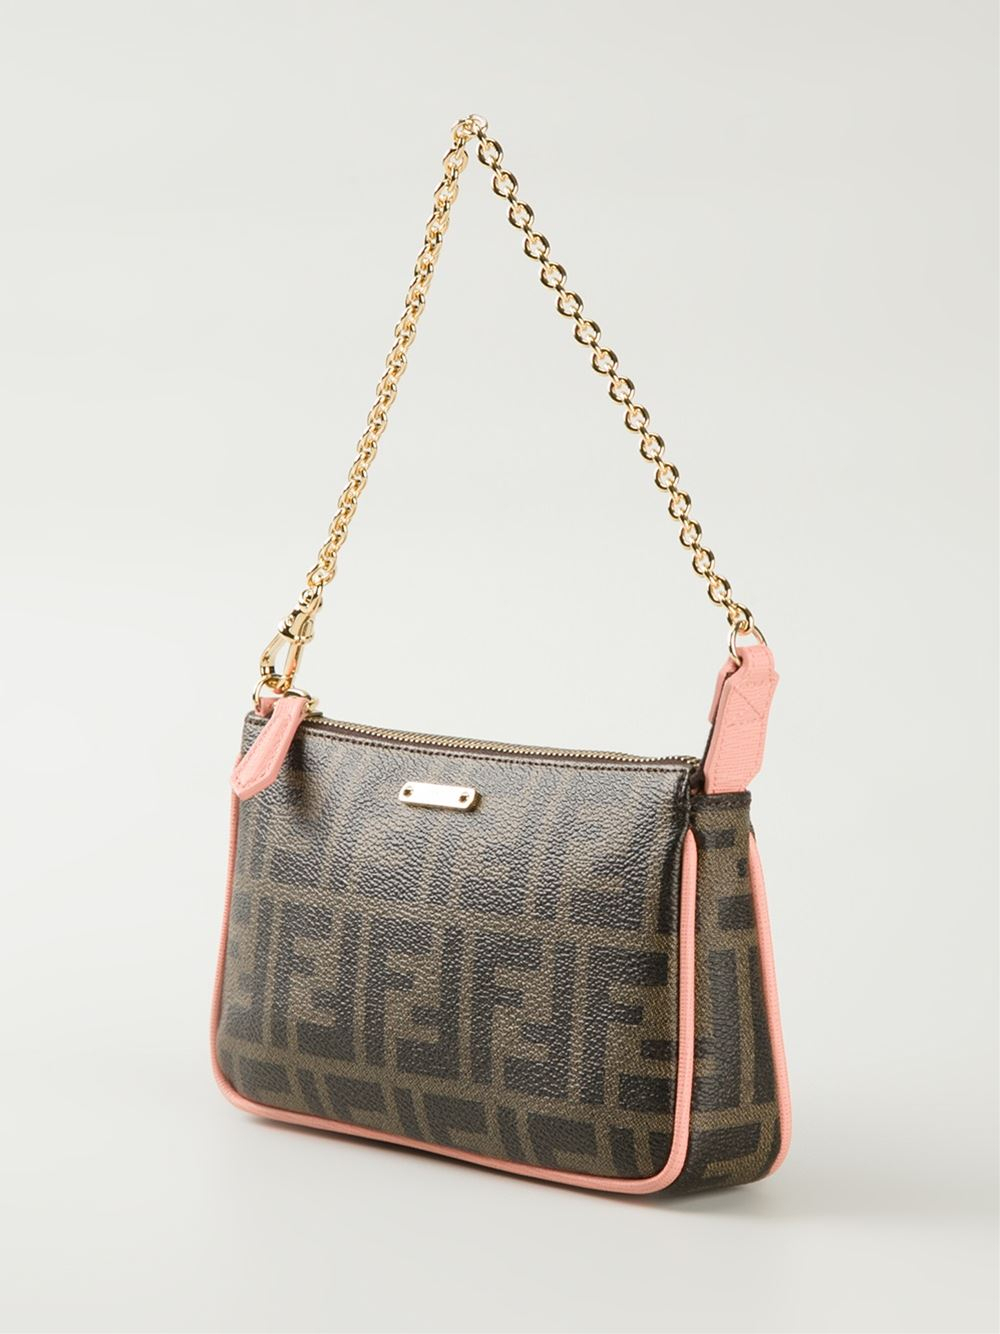 Lyst - Fendi FF Small Leather Shoulder Bag in Brown